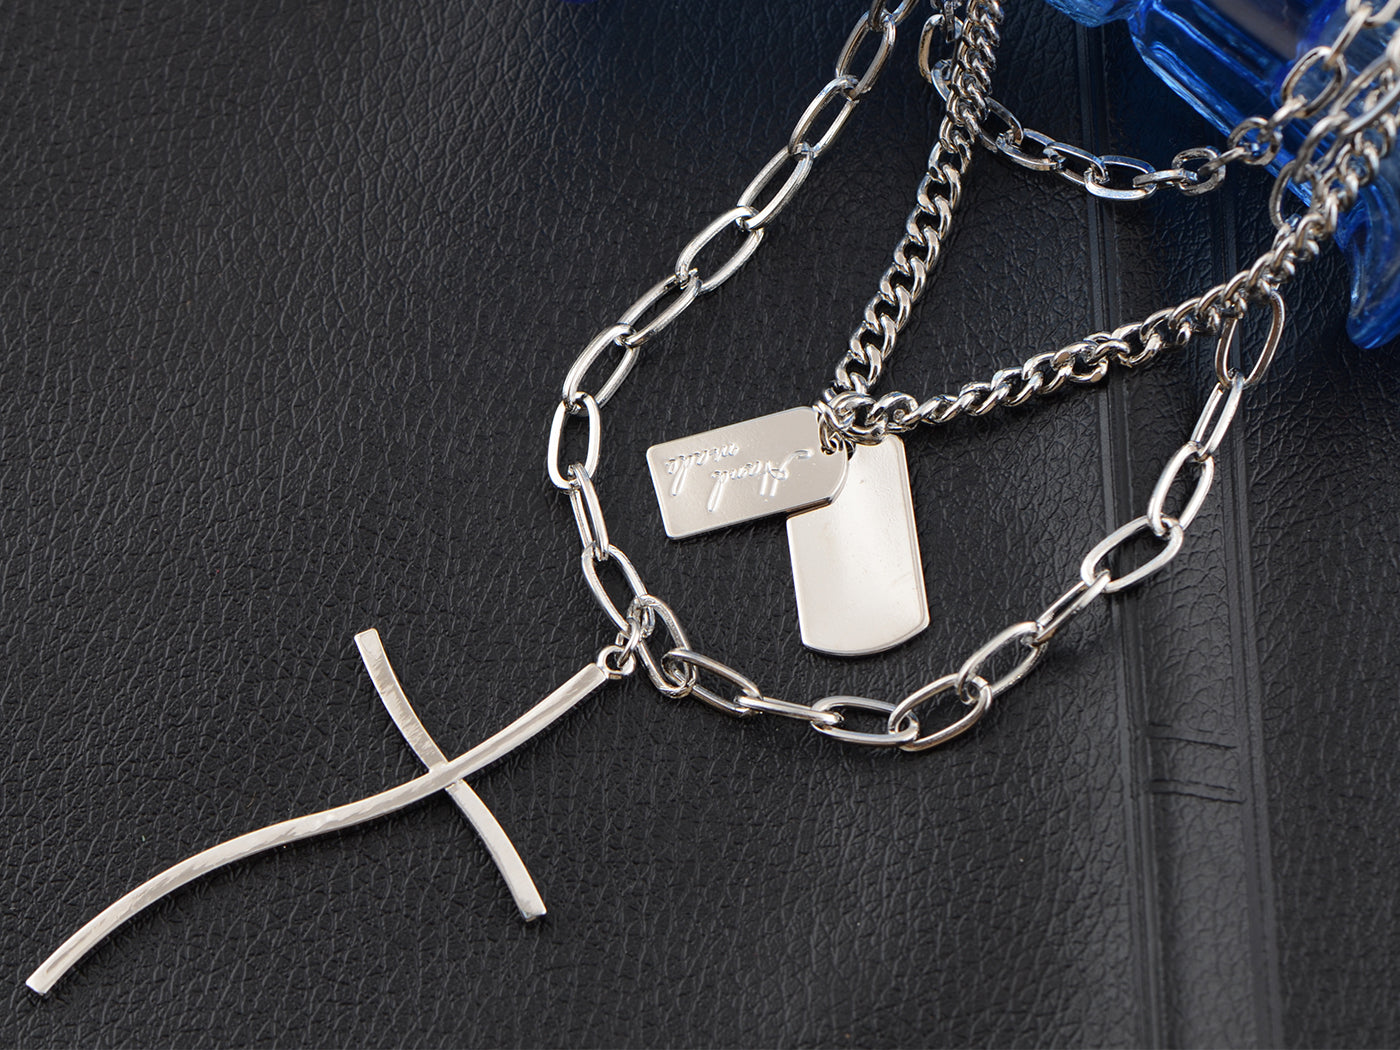 Polished Silver D Religious Inspirational Army Dog Tags Cross Pendant Necklace